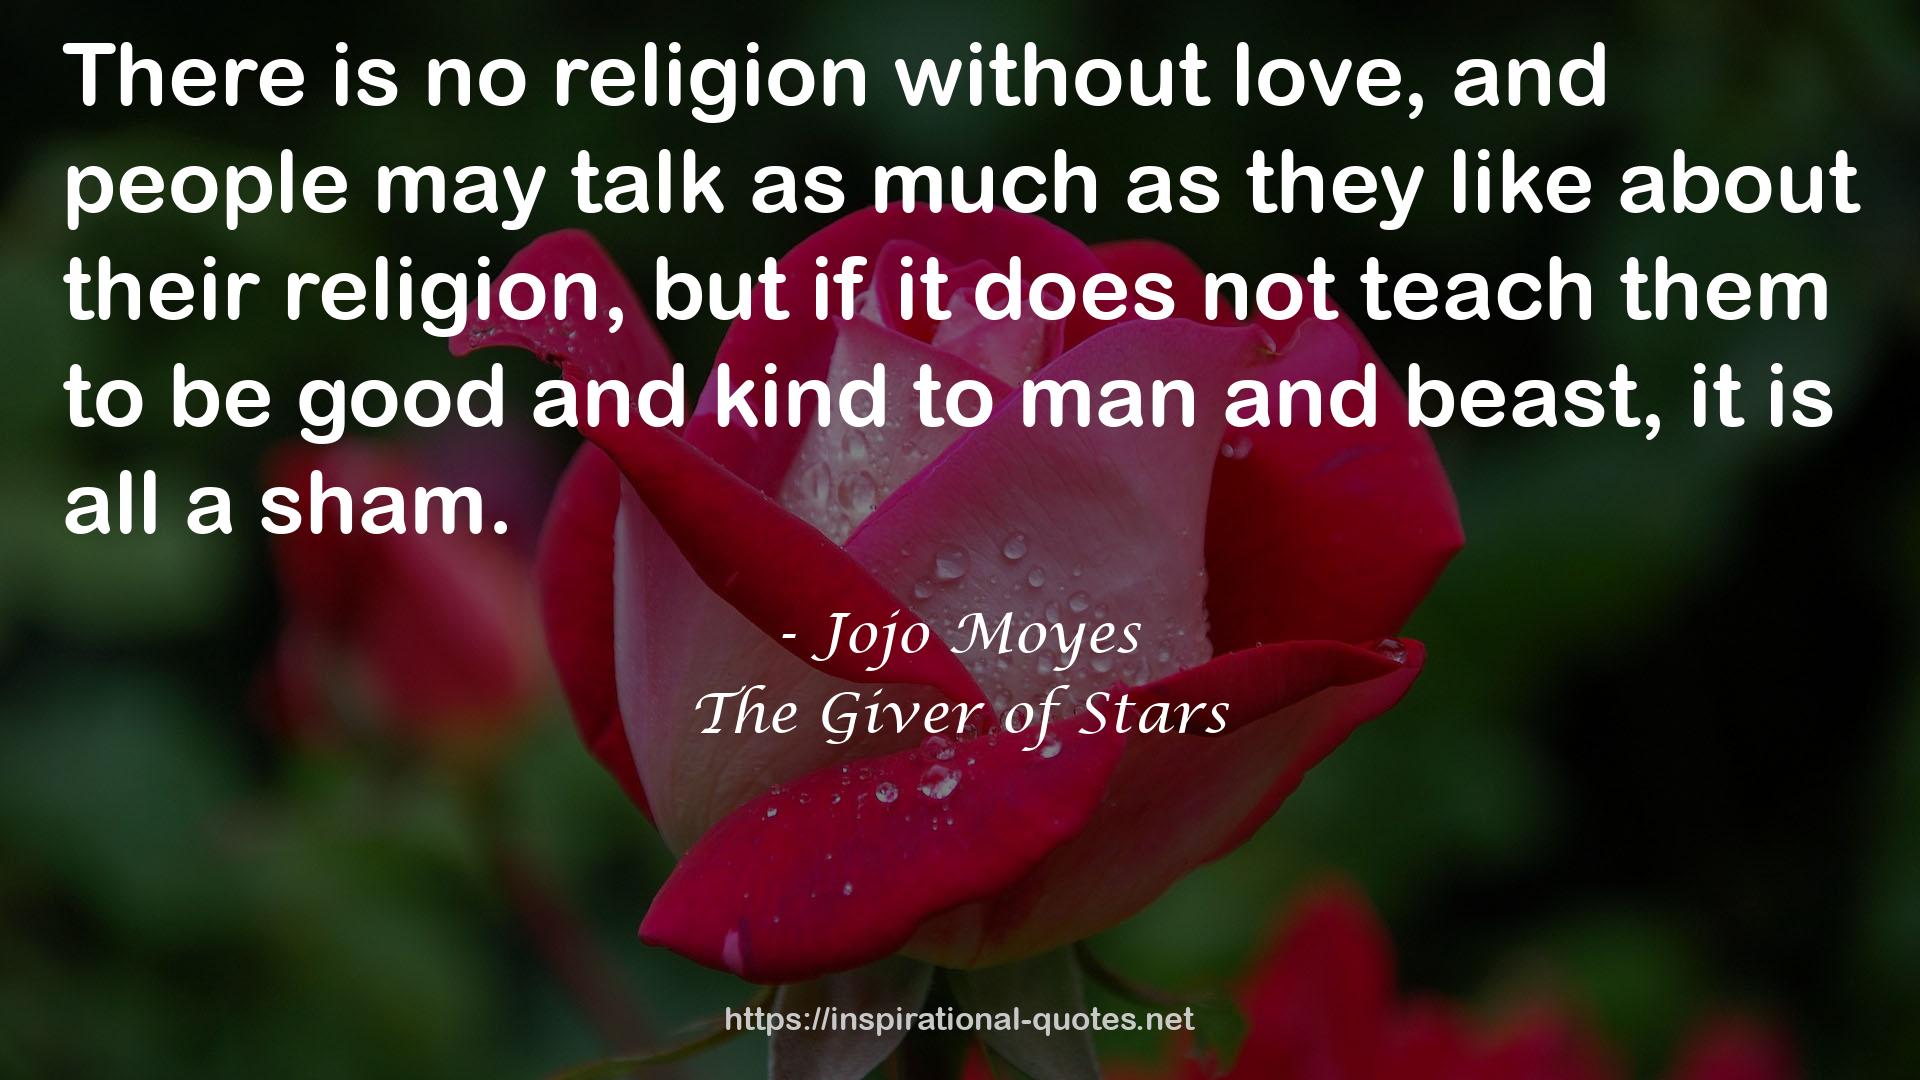 The Giver of Stars QUOTES